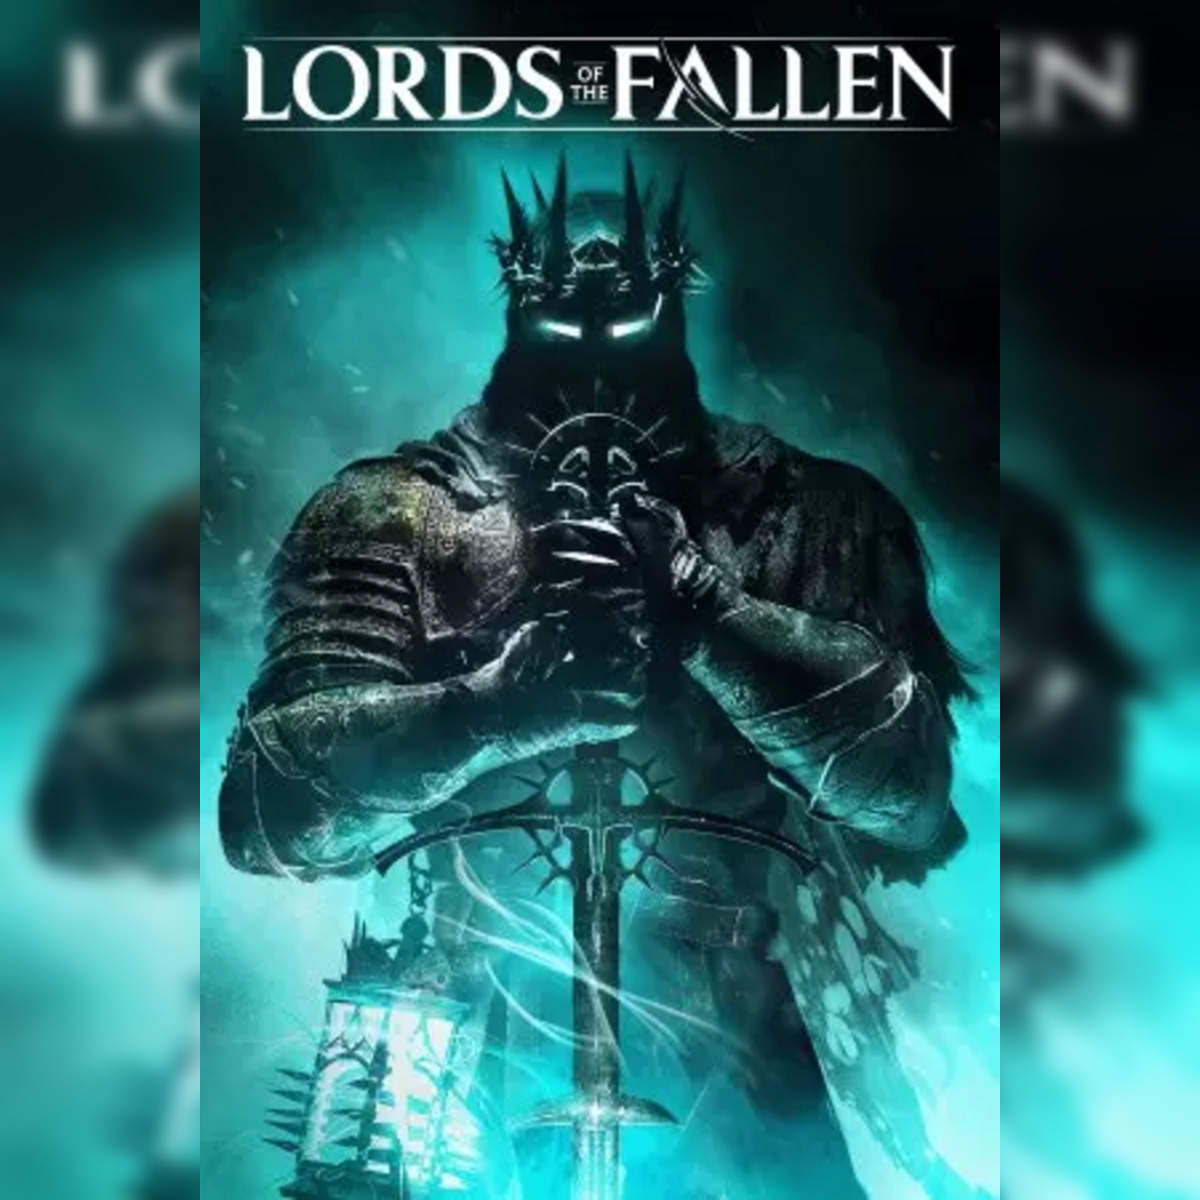 Buy Lords of the Fallen Game of the Year Edition (2014) Xbox Live